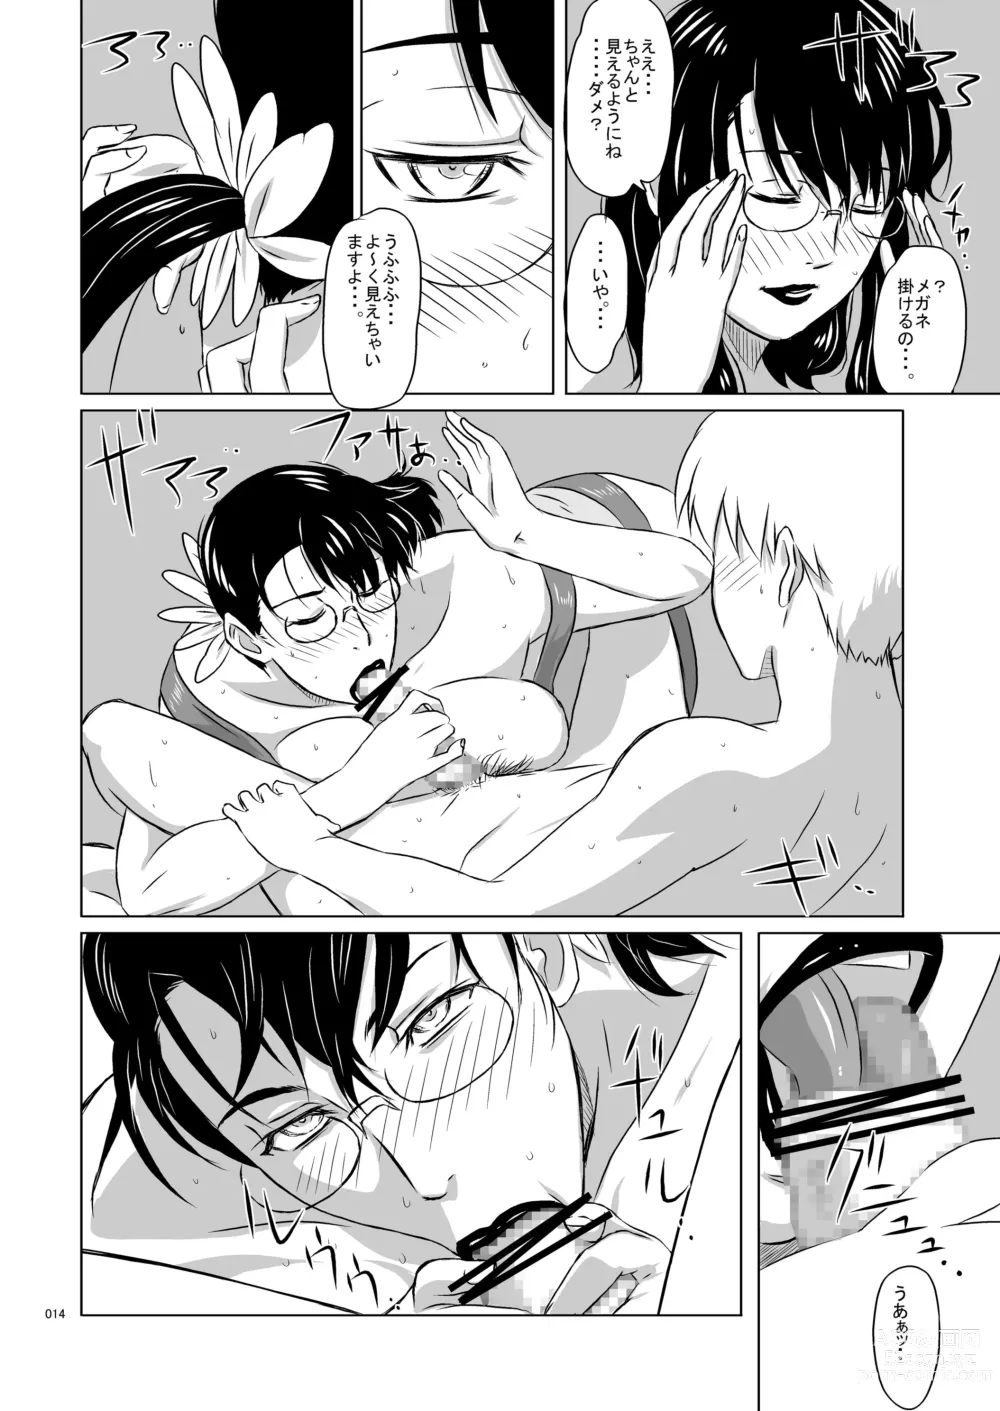 Page 14 of doujinshi Package-Meat 7